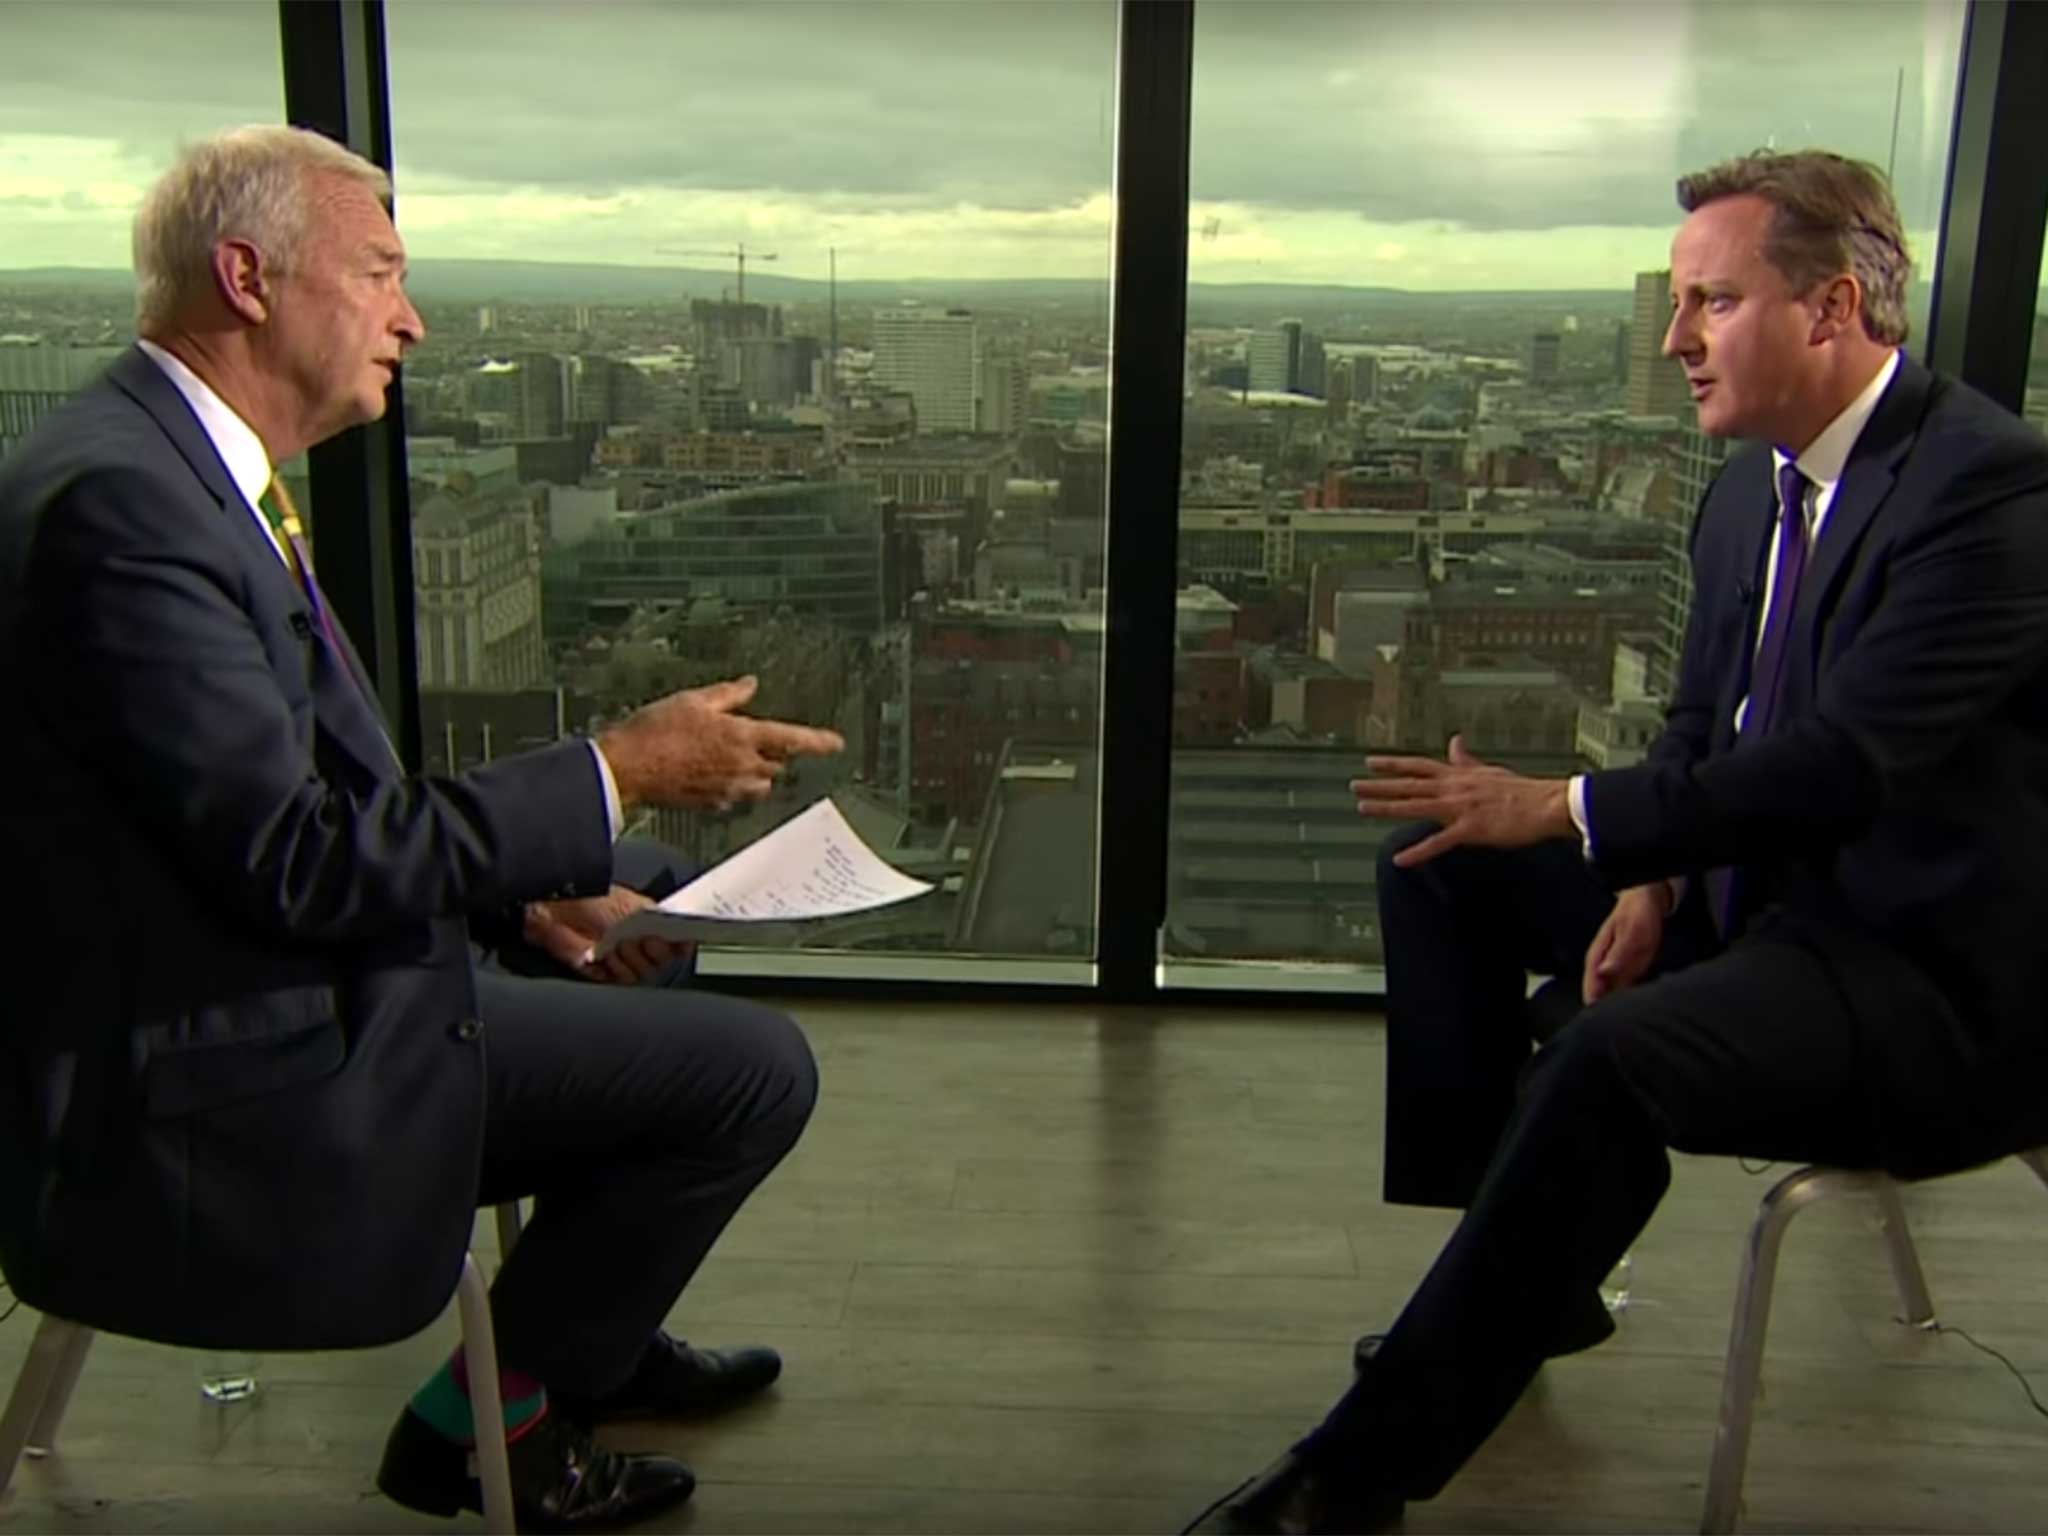 Cameron repeatedly failed to answer the question during the interview